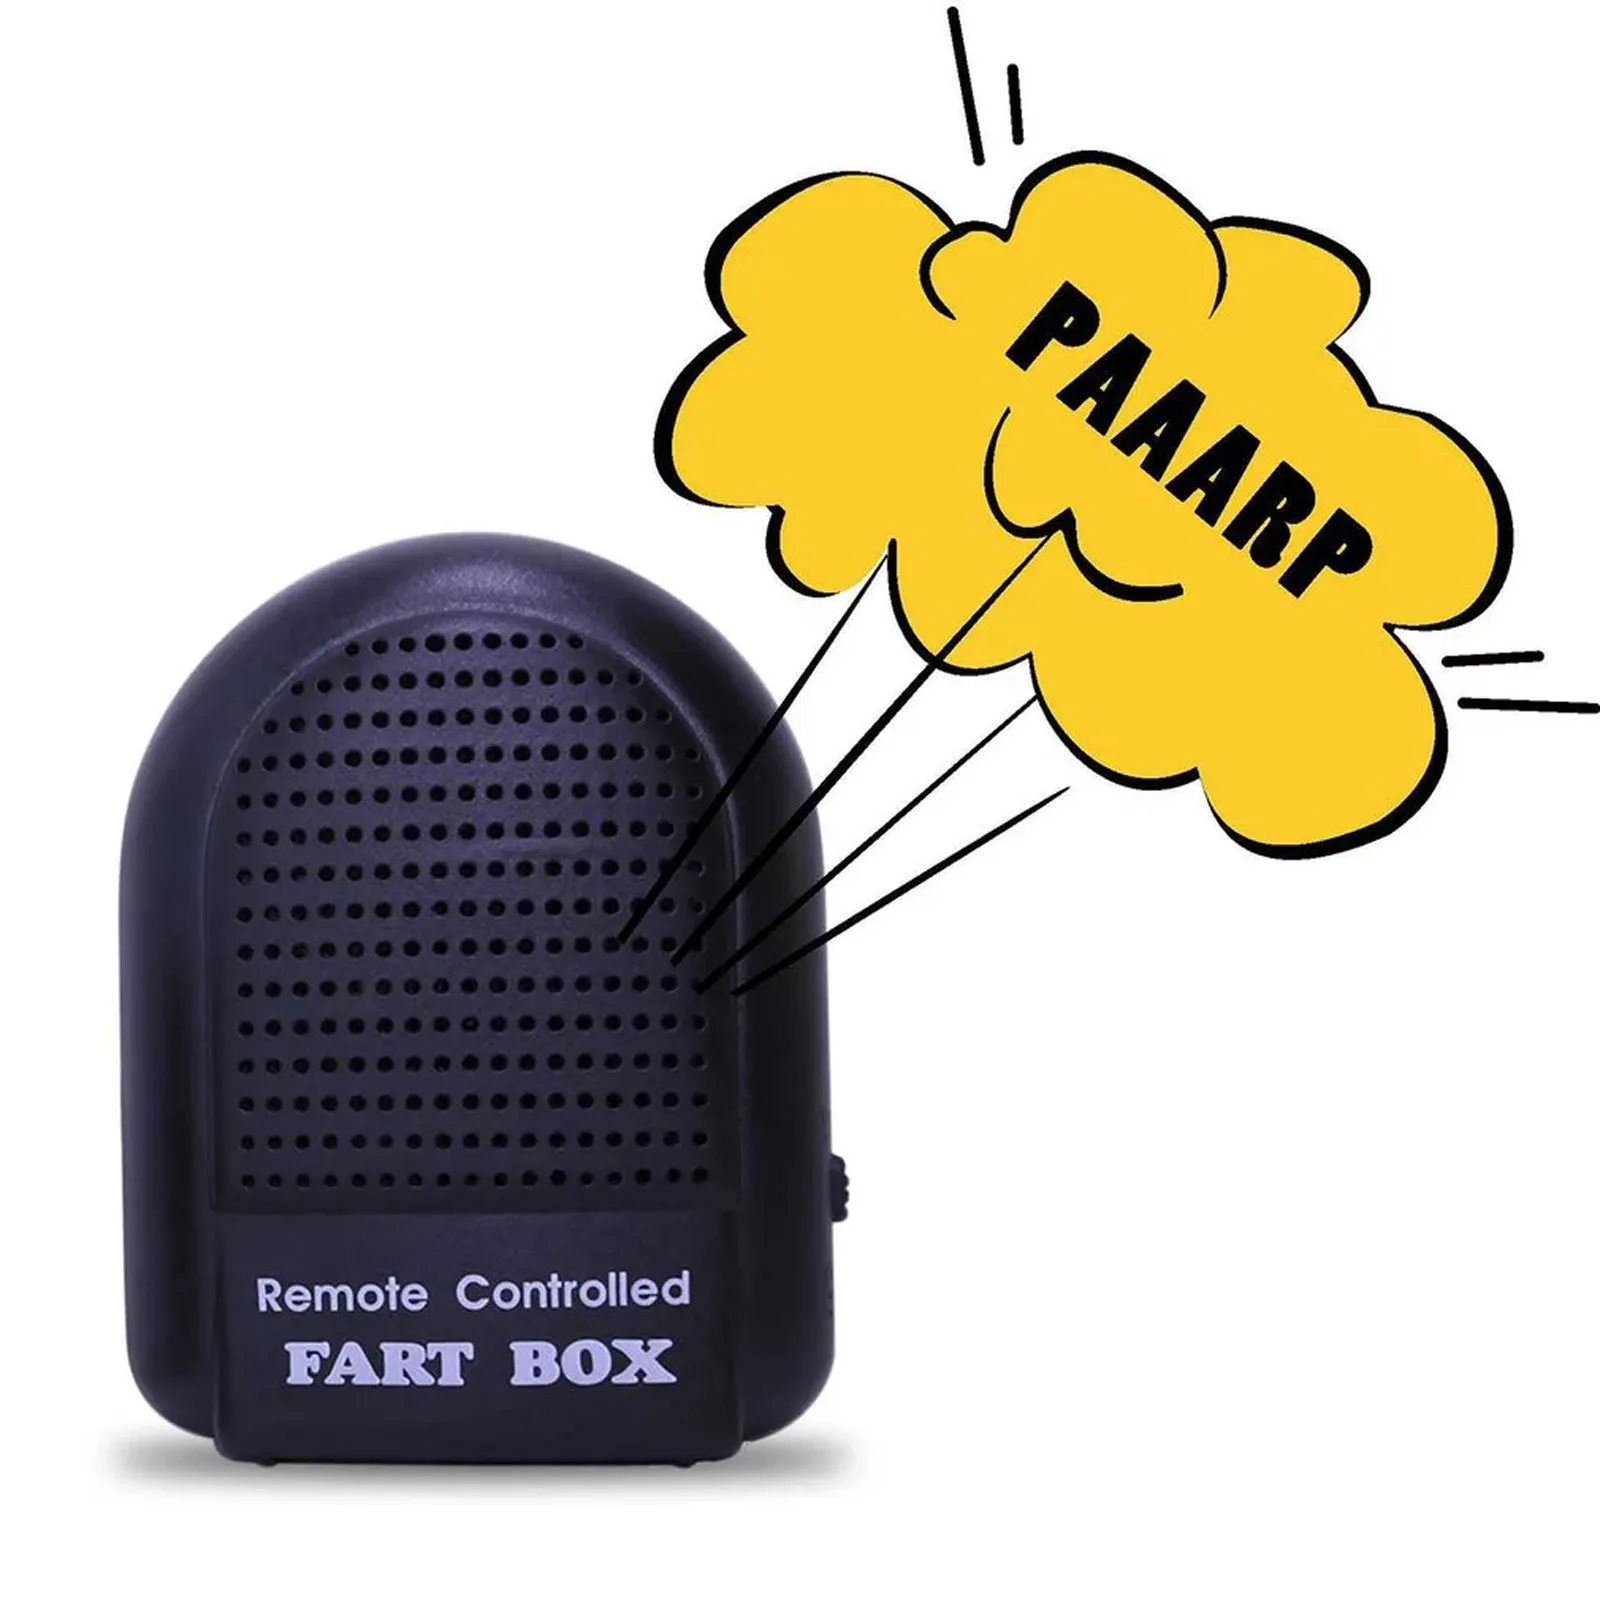 

Funny Tricky Electronic Remote Fart Box Gift Series Control Woody Authentic-sounding Magnetic Fart Box Gift For Friends